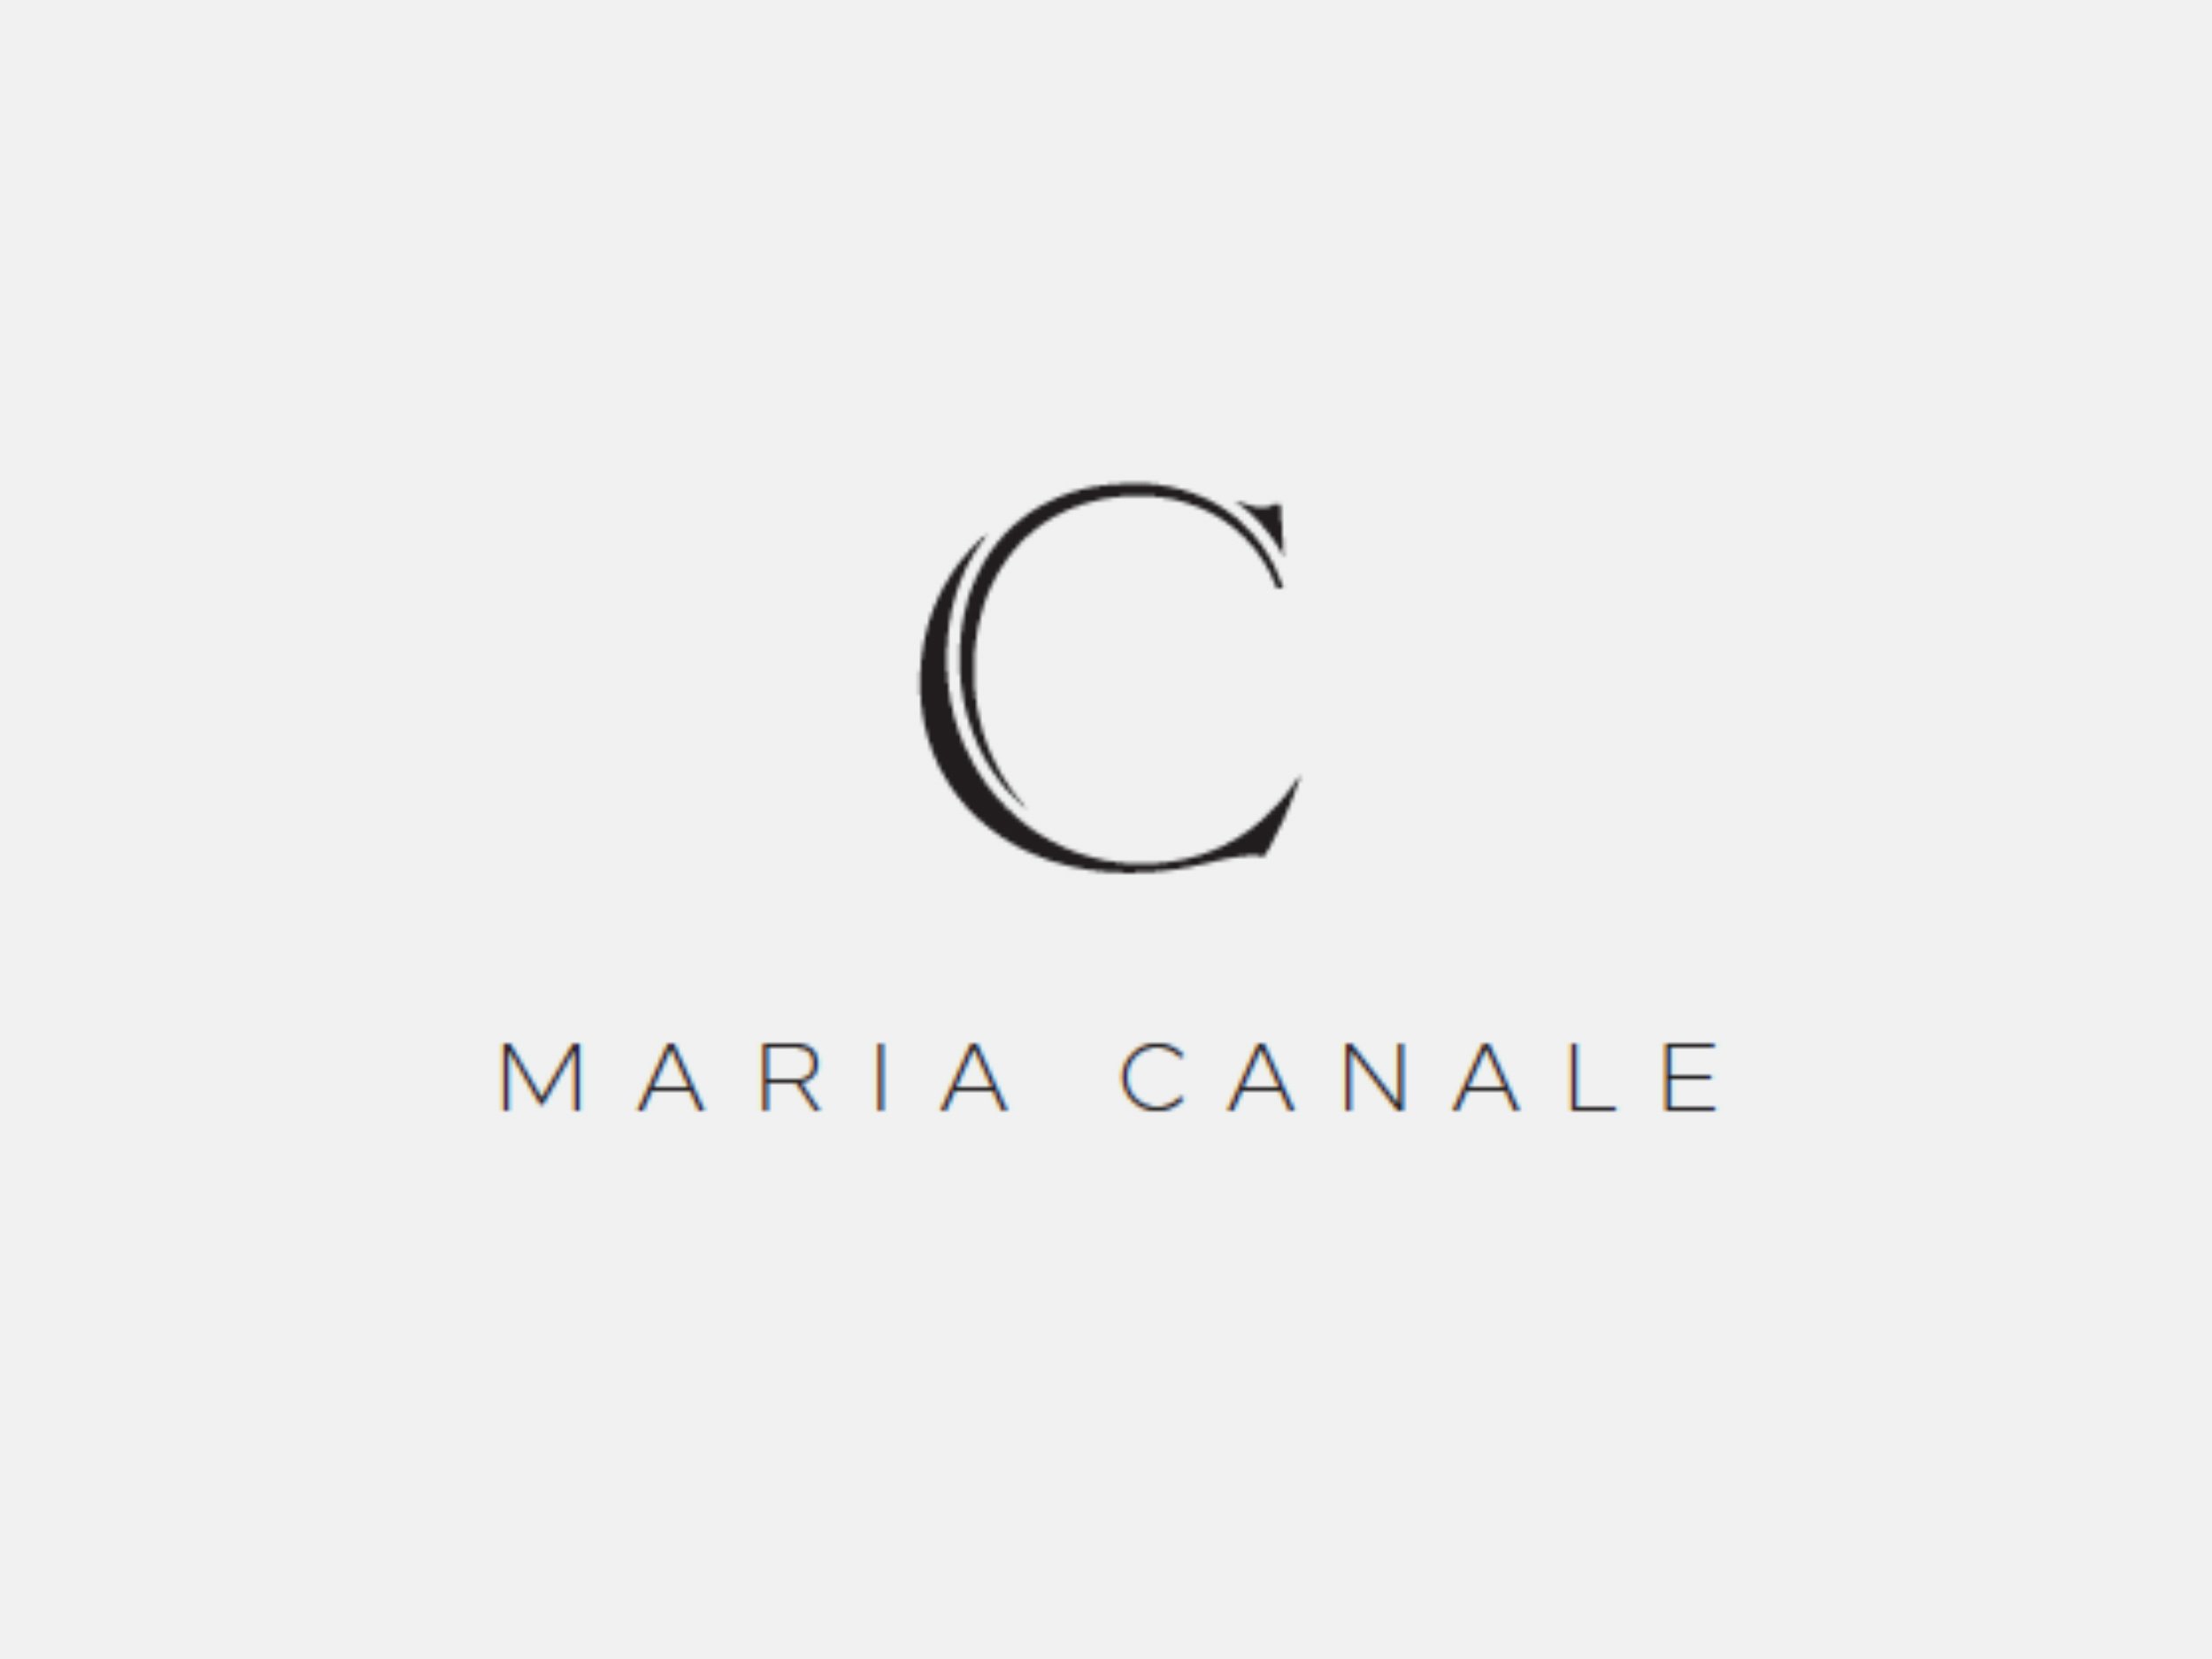 LEVINE_CLIENT_LOGOS_0000s_0011_MARIA CANALE GREY.jpg